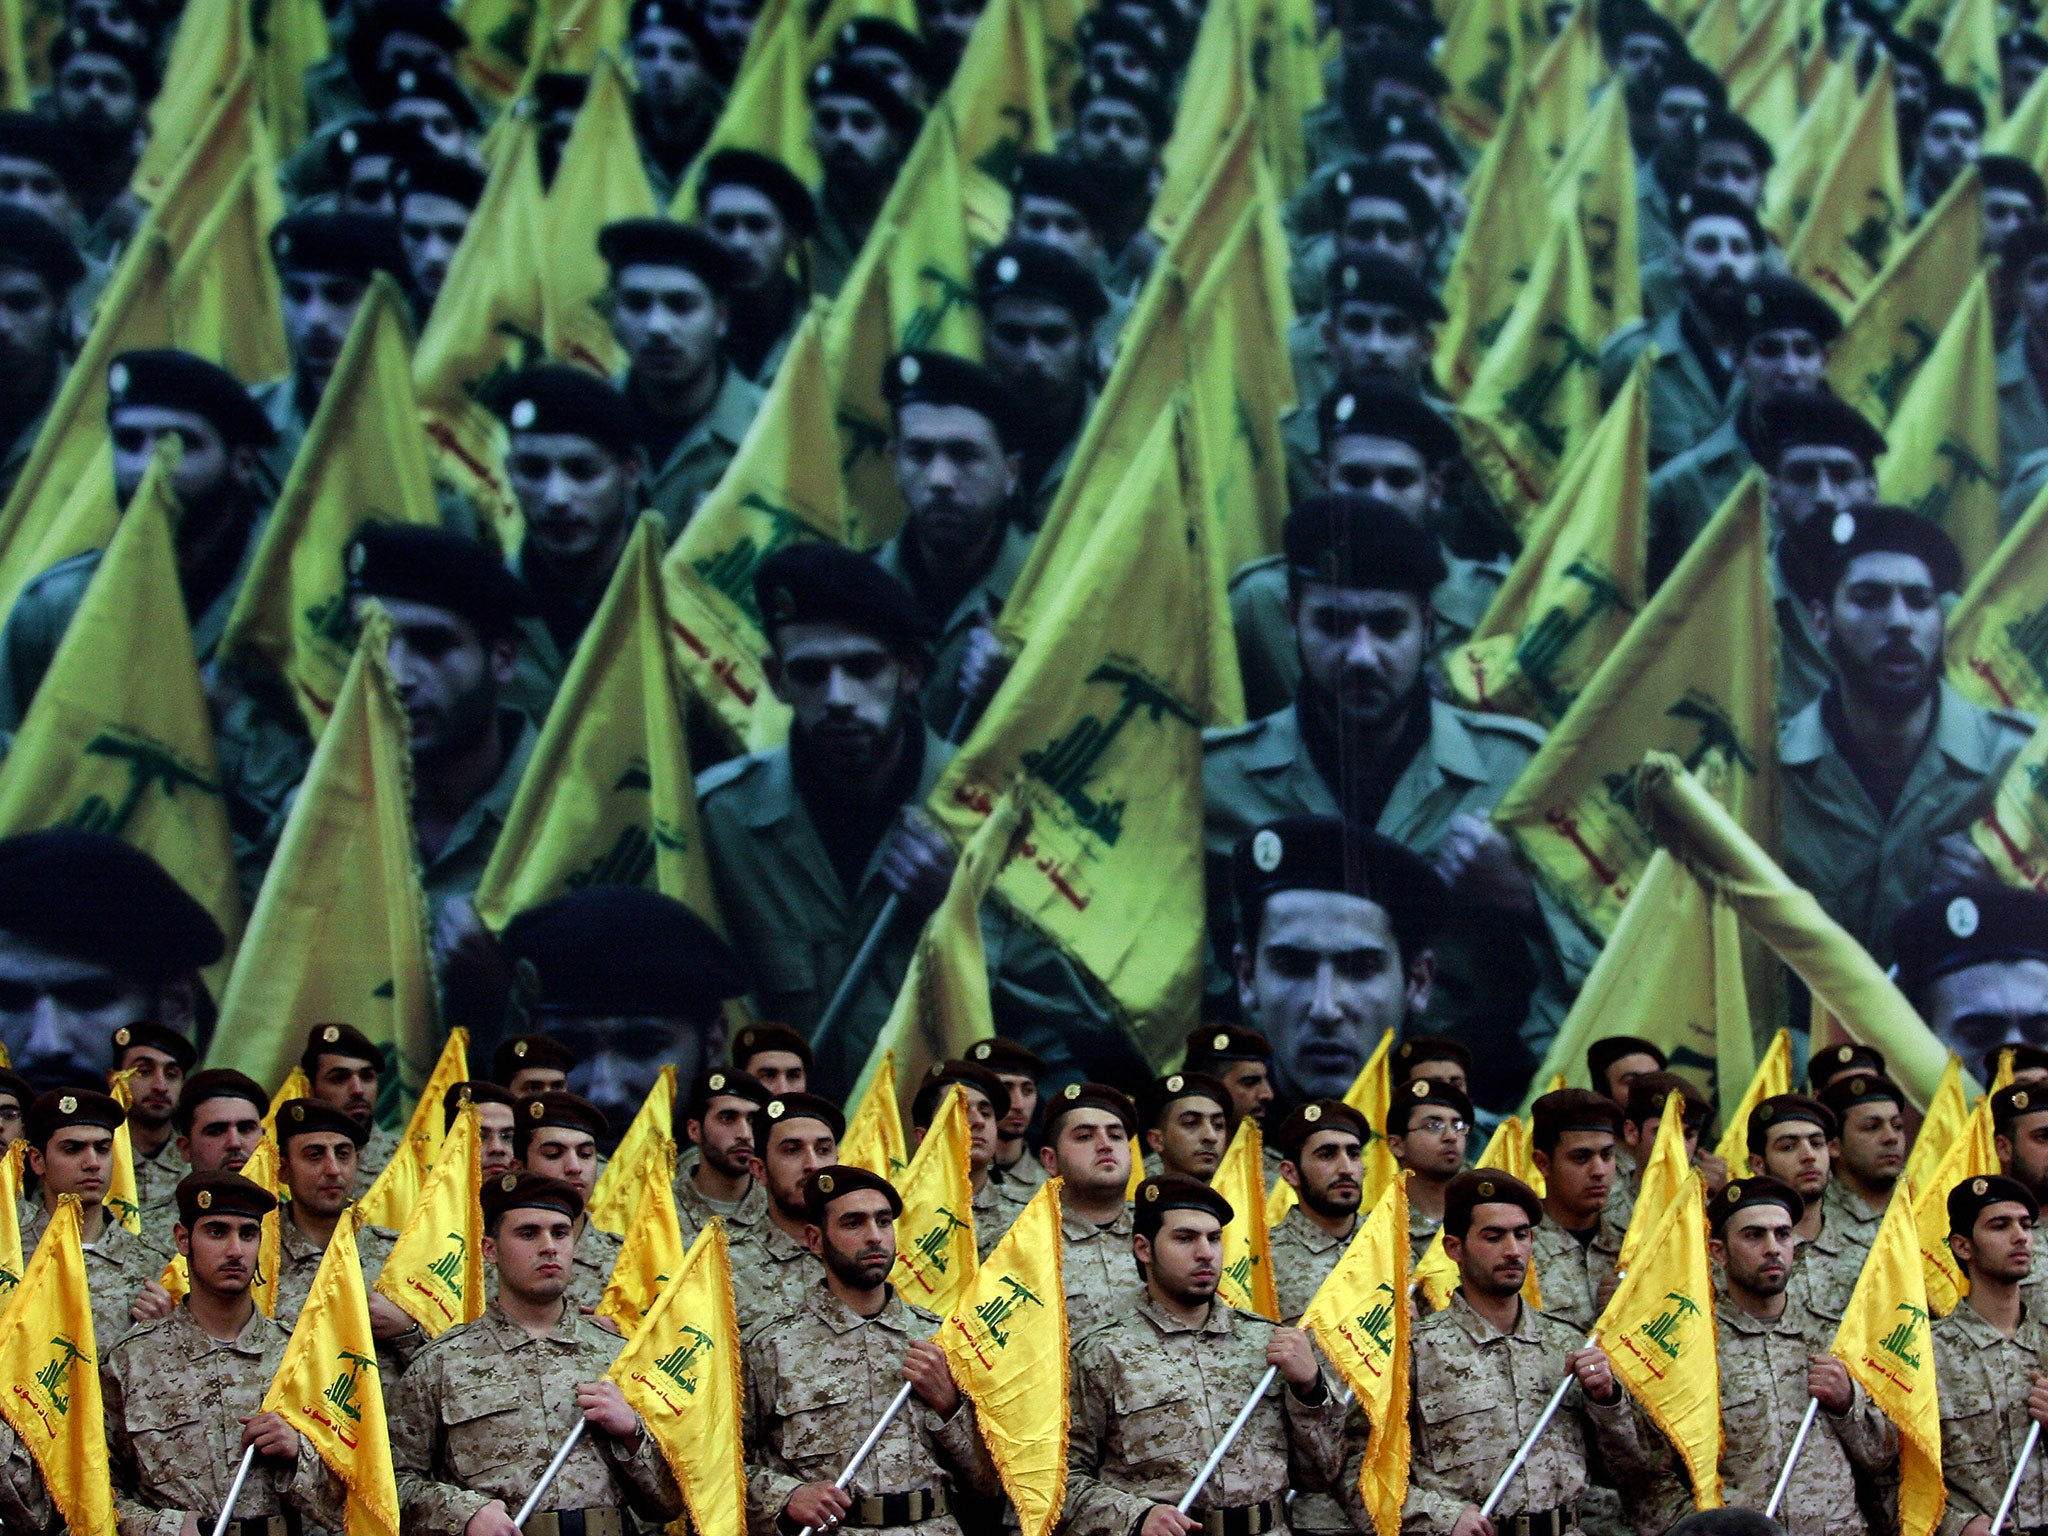 Iran is accused of 'providing a range of support, including financial, training, and equipment' to organisations such as Lebanon's Hezbollah